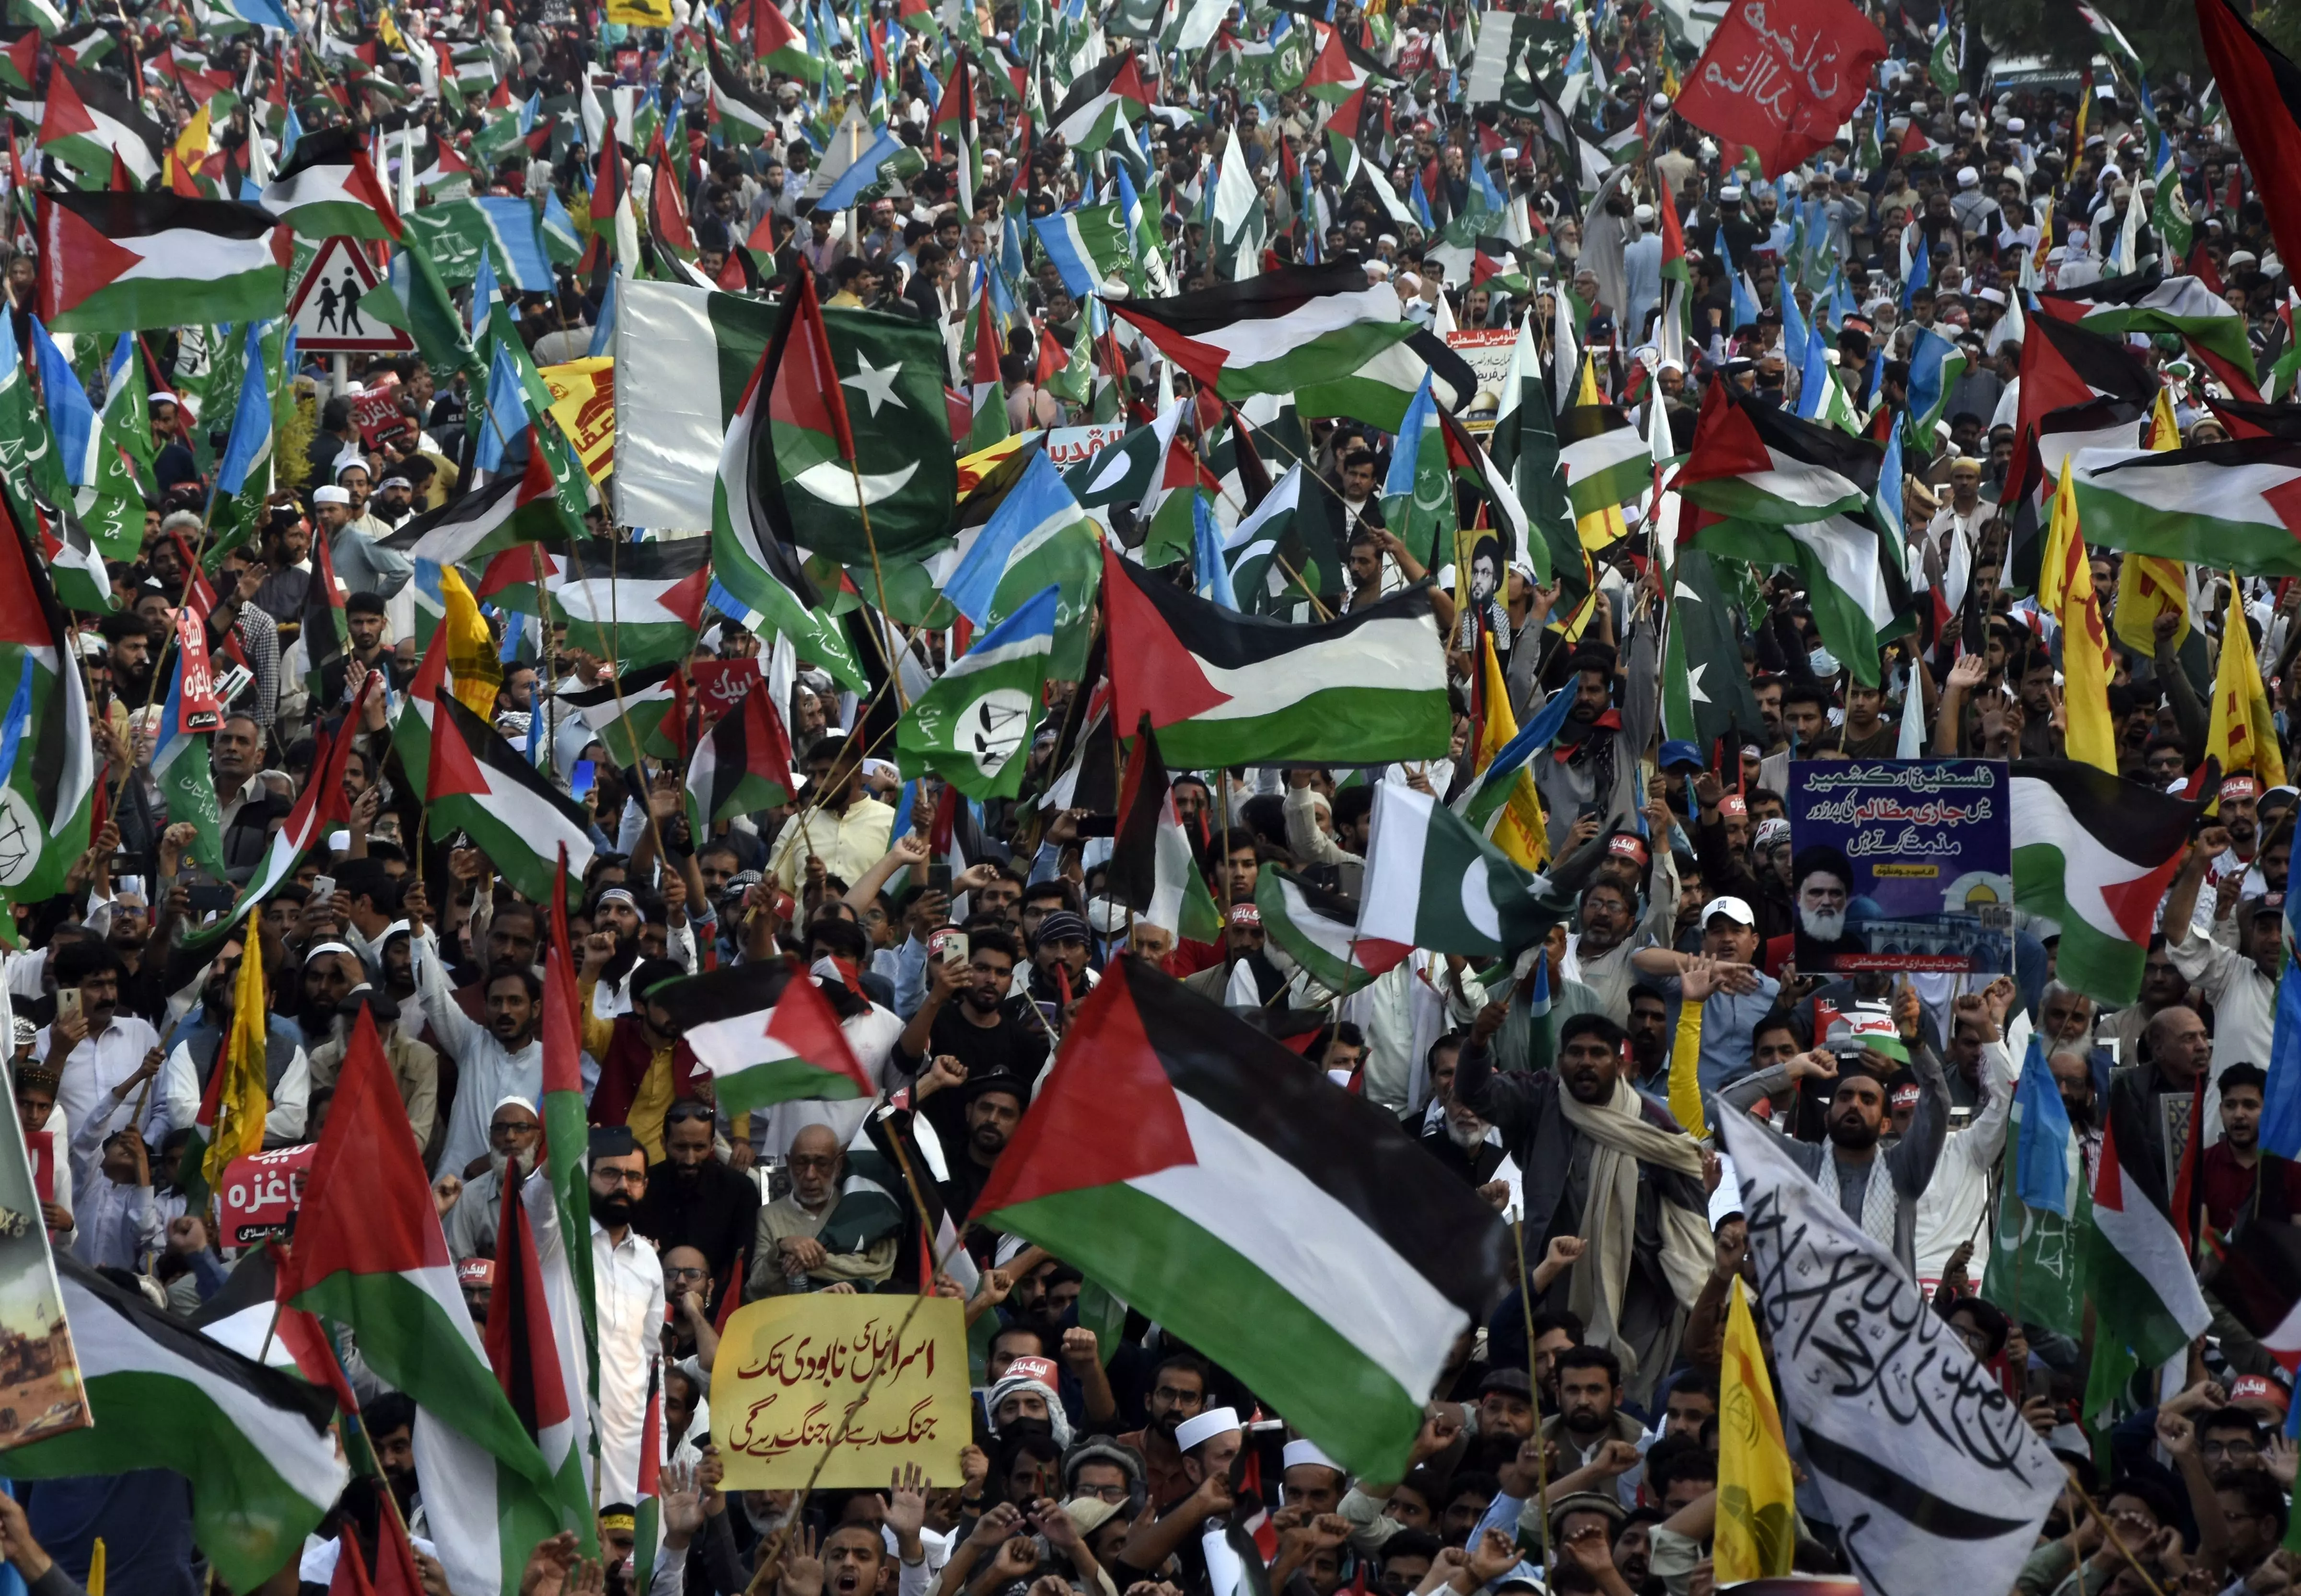 Thousands of supporters of religious party Jamat-e-Islami take part in a rally against the Israeli airstrikes on Gaza and to show solidarity with Palestinian people, in Islamabad, Pakistan, on Sunday (Octoer 29) | AP/PTI